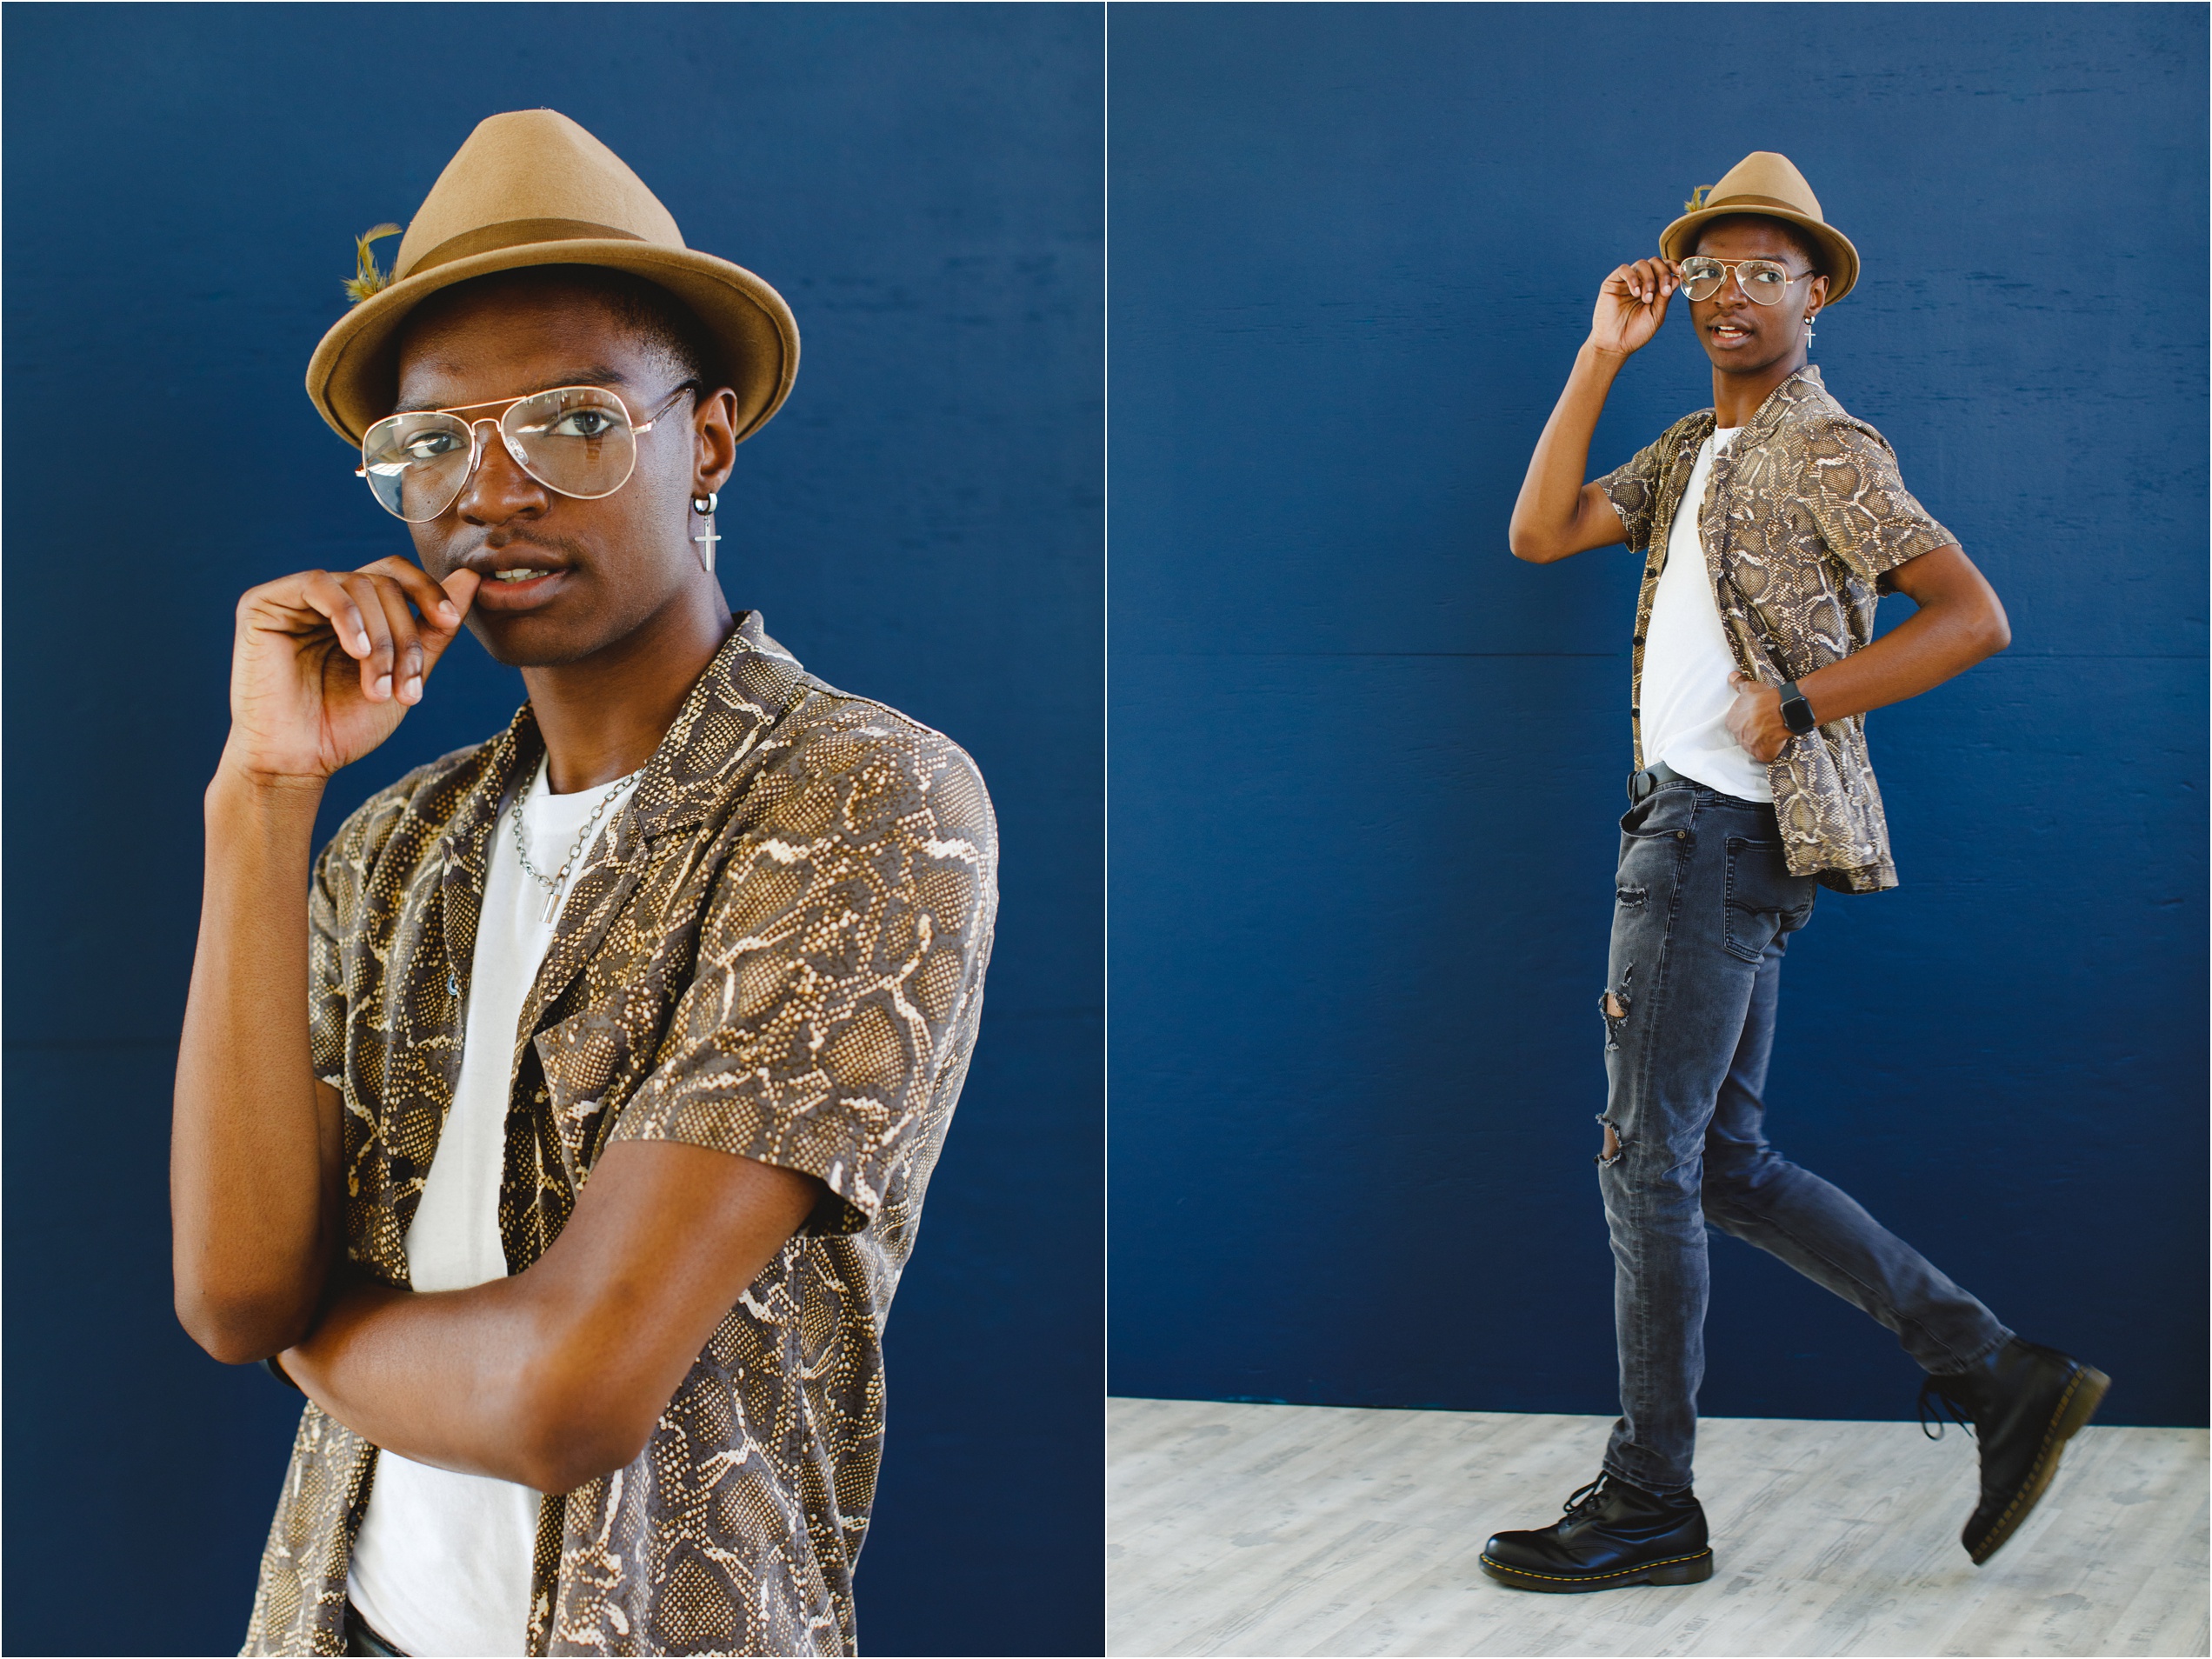 Akiva poses in items from the slice of lime style closet during his photography studio session for his senior boy pictures